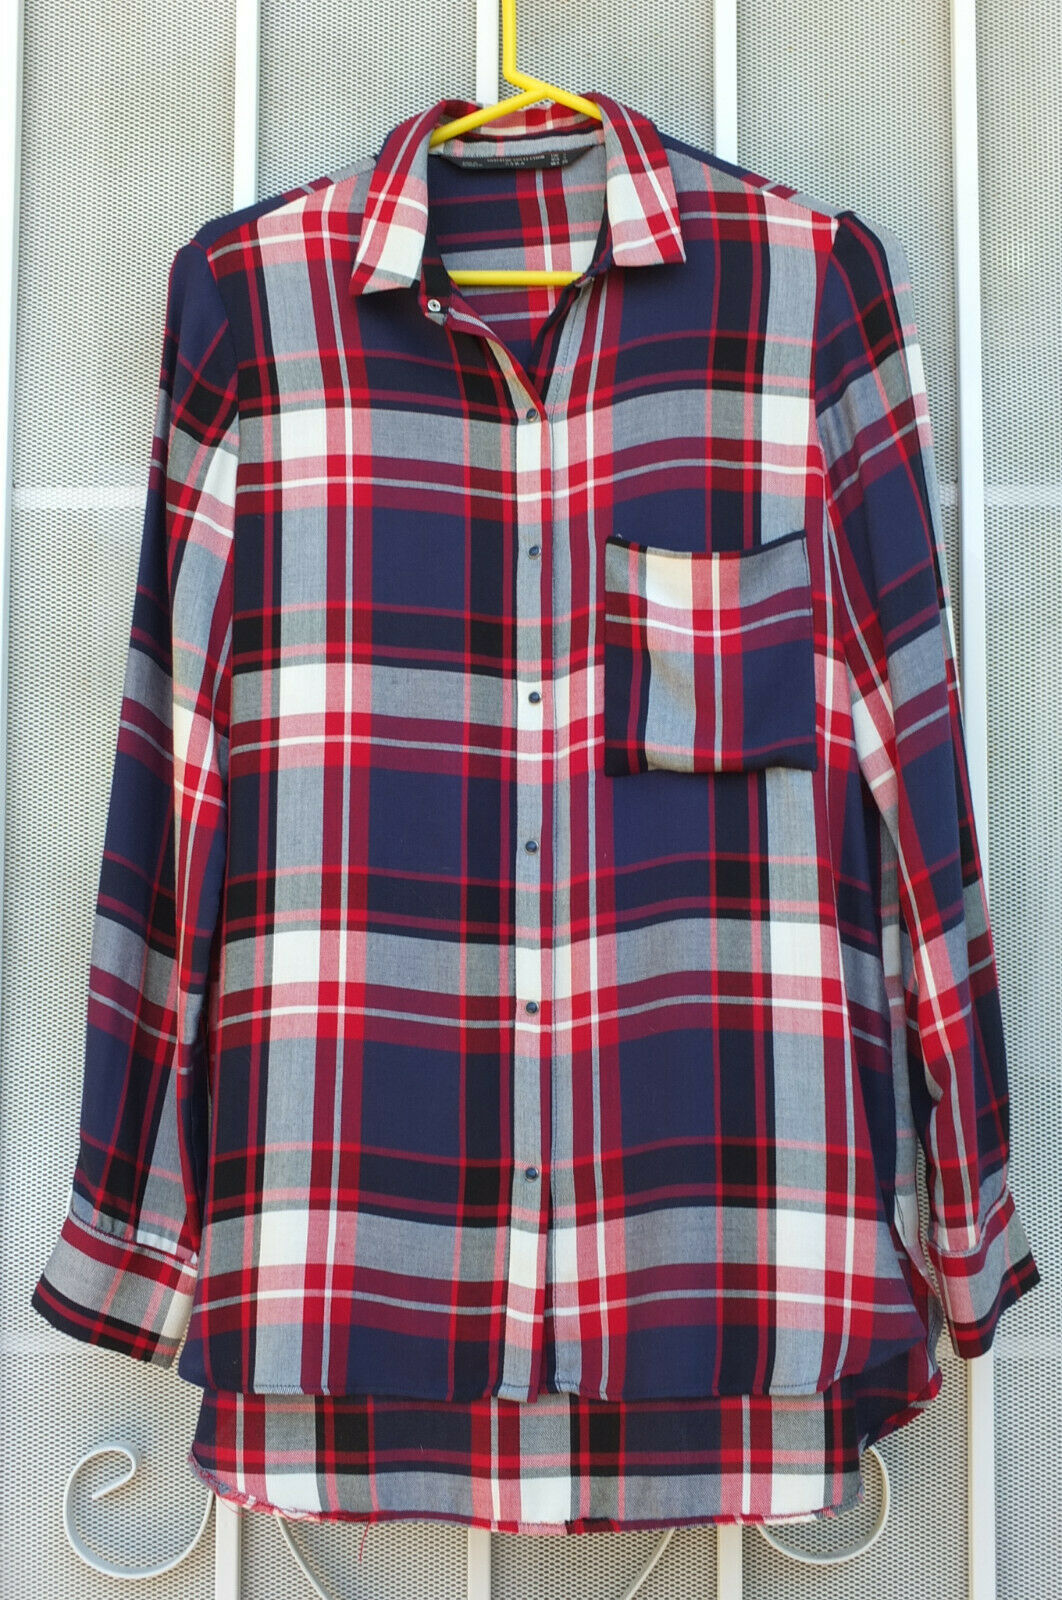 Primary image for ZARA ~ Trafaluc Collection Sz S Plaid Shirt Snap Closures ~ SHIPS FREE